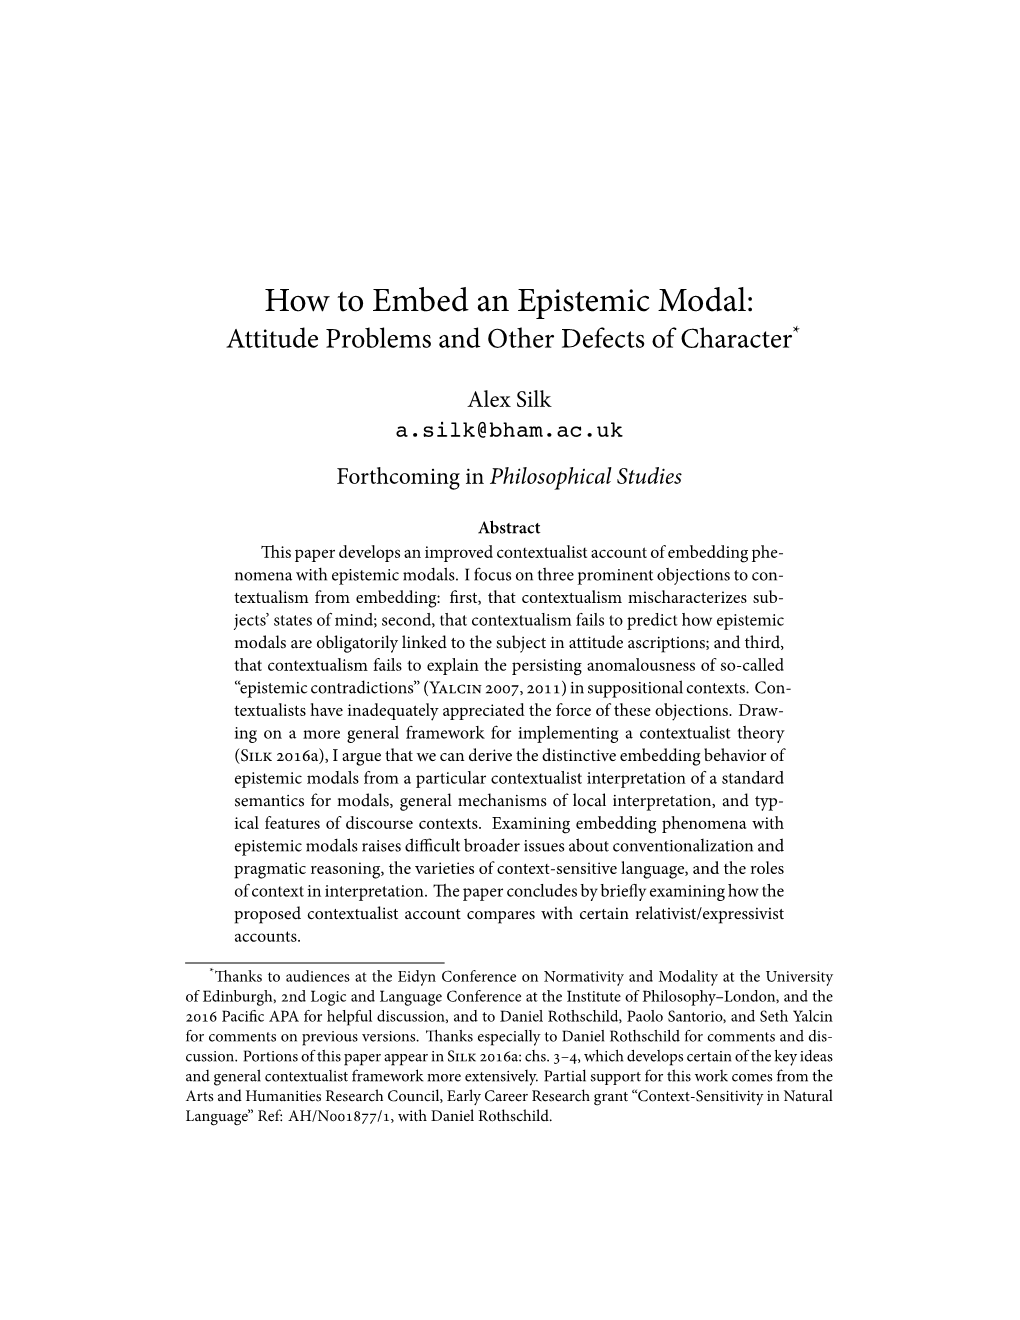 How to Embed an Epistemic Modal: Attitude Problems and Other Defects of Character*